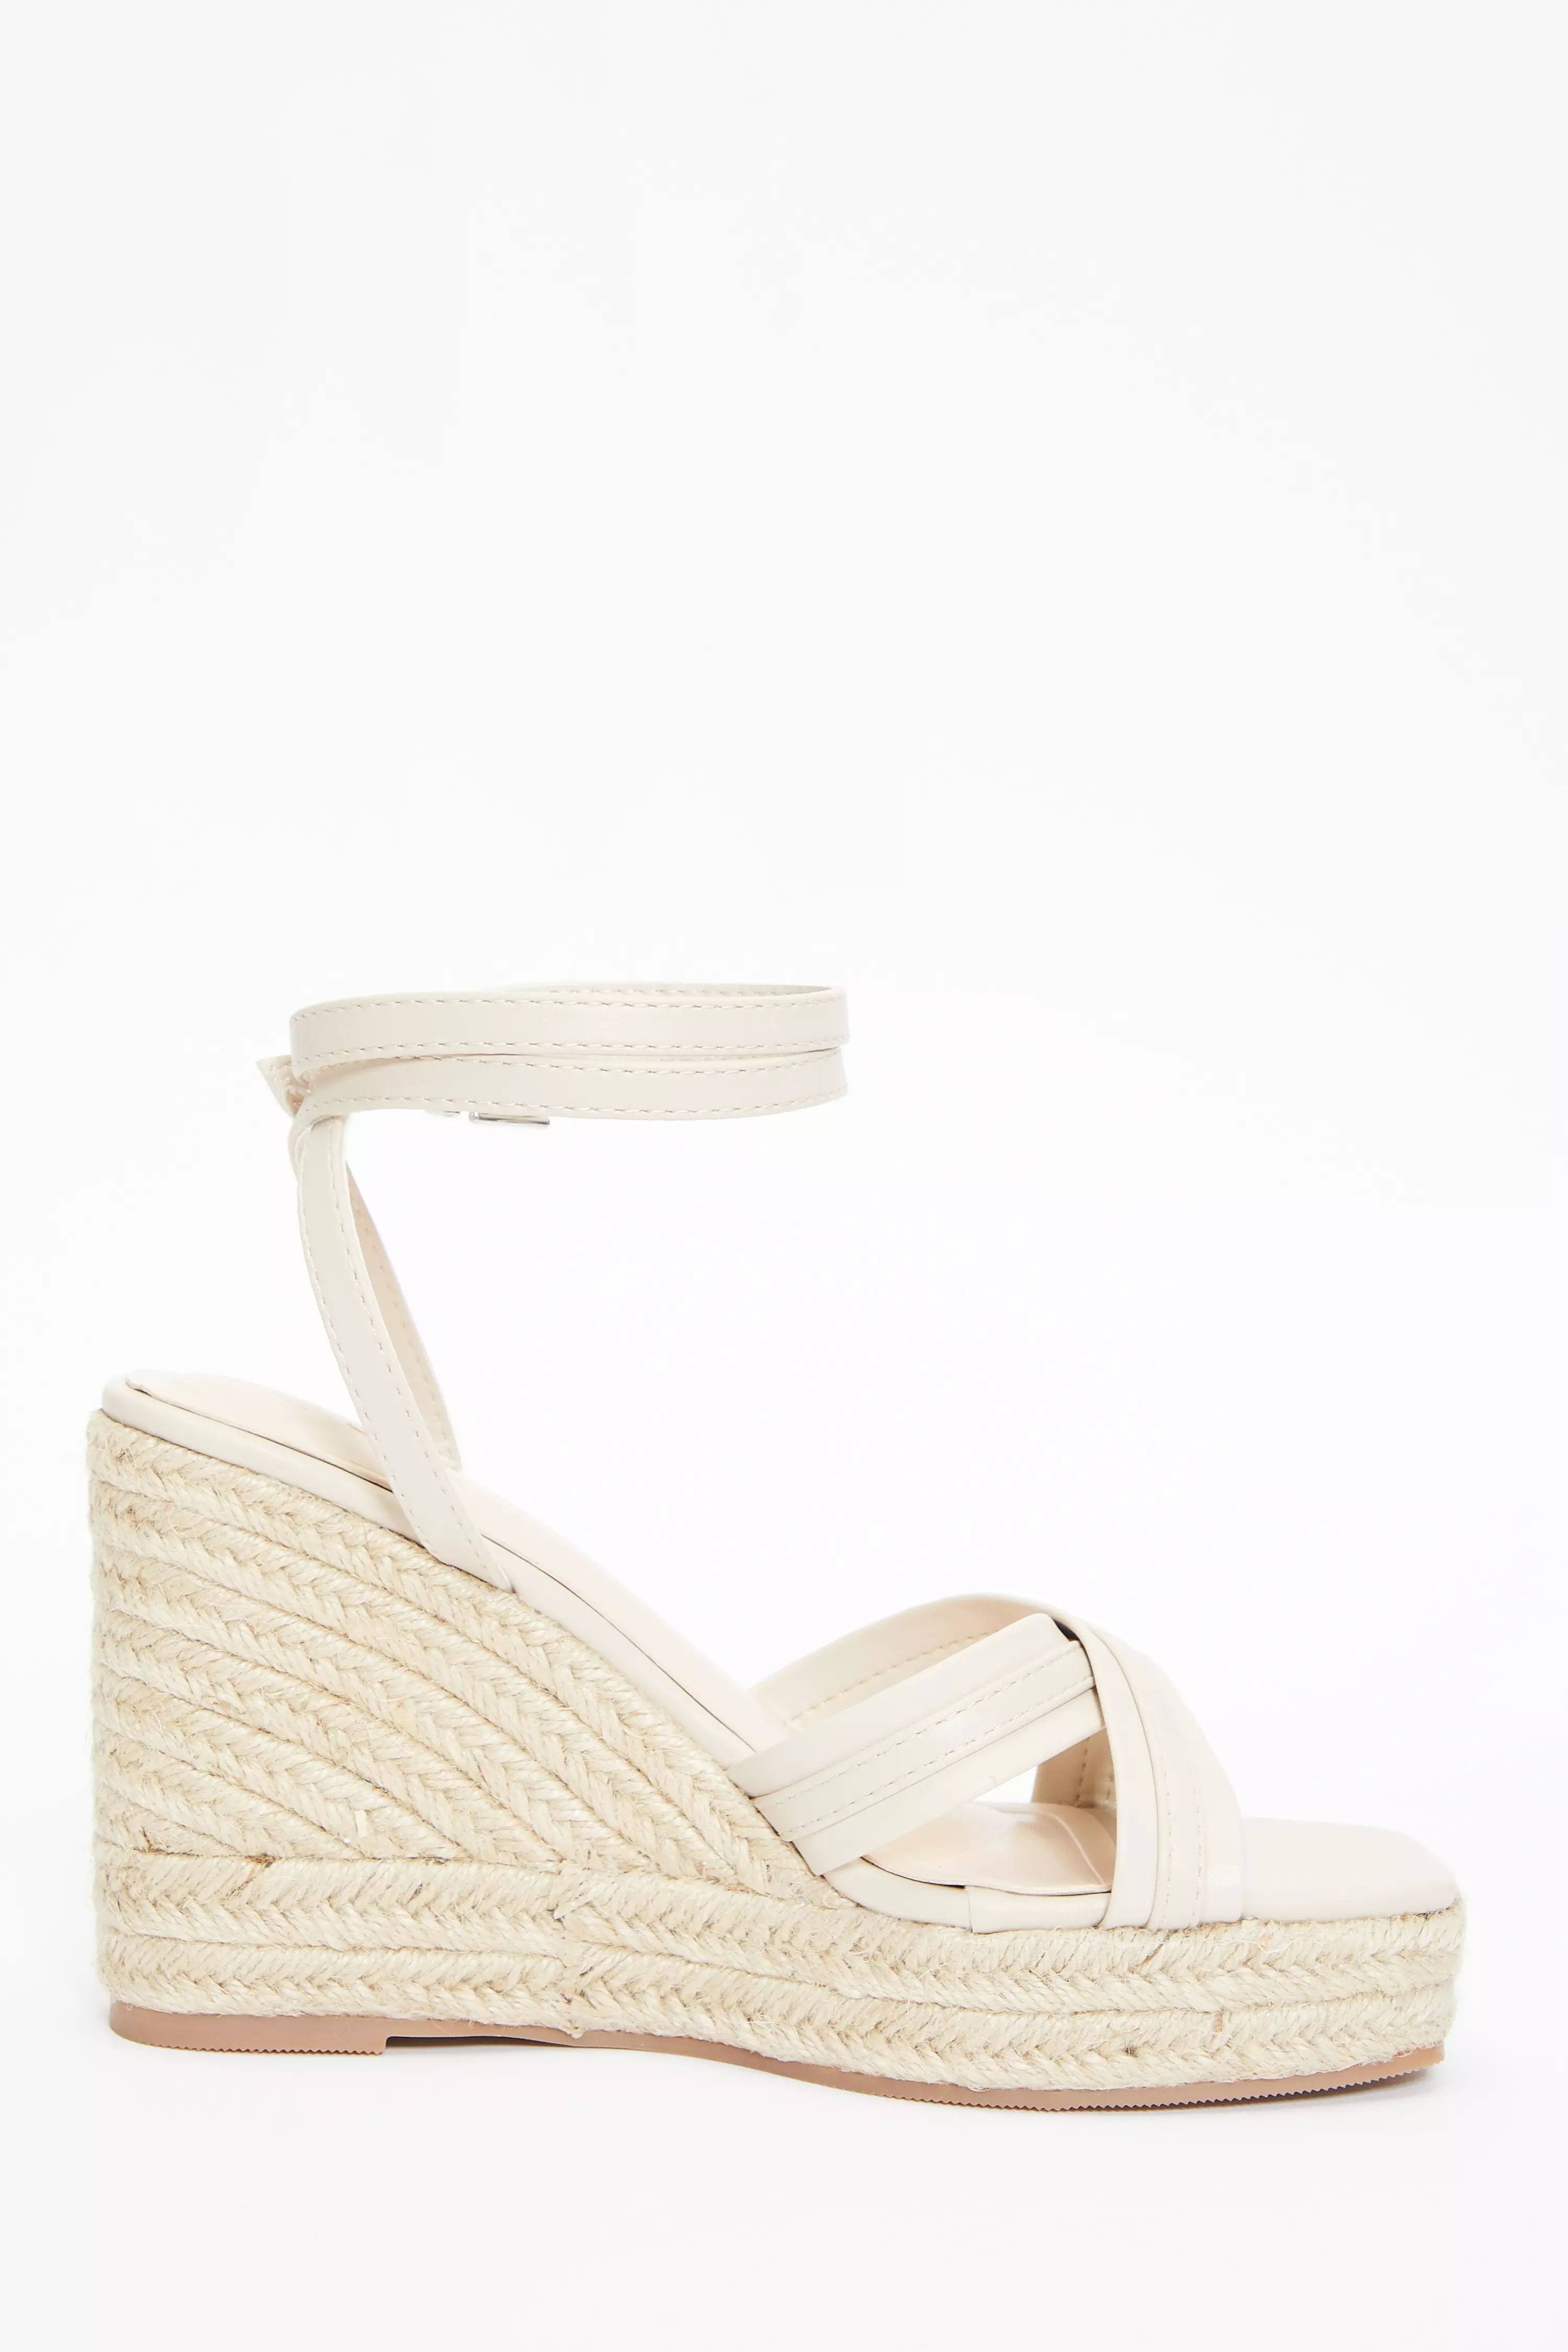 Nude Cross Strap Wedges - QUIZ Clothing